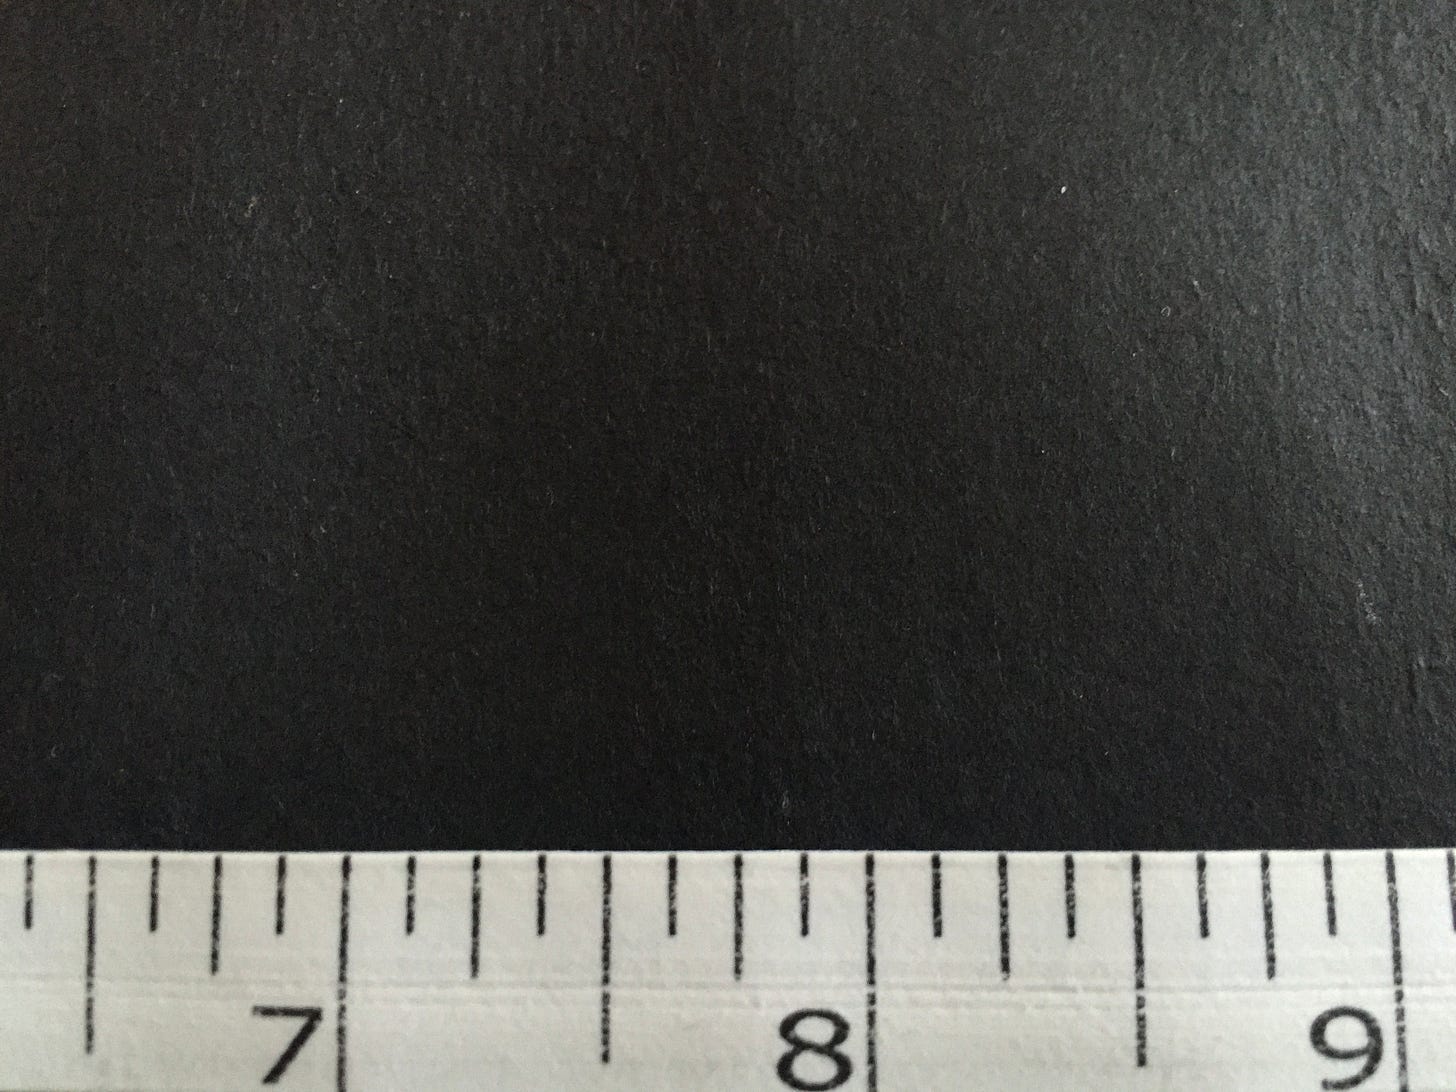 A white tape measure with black tick marks and numbers  7,  8 and 9 sits  on a shiny and bumpy black surface.